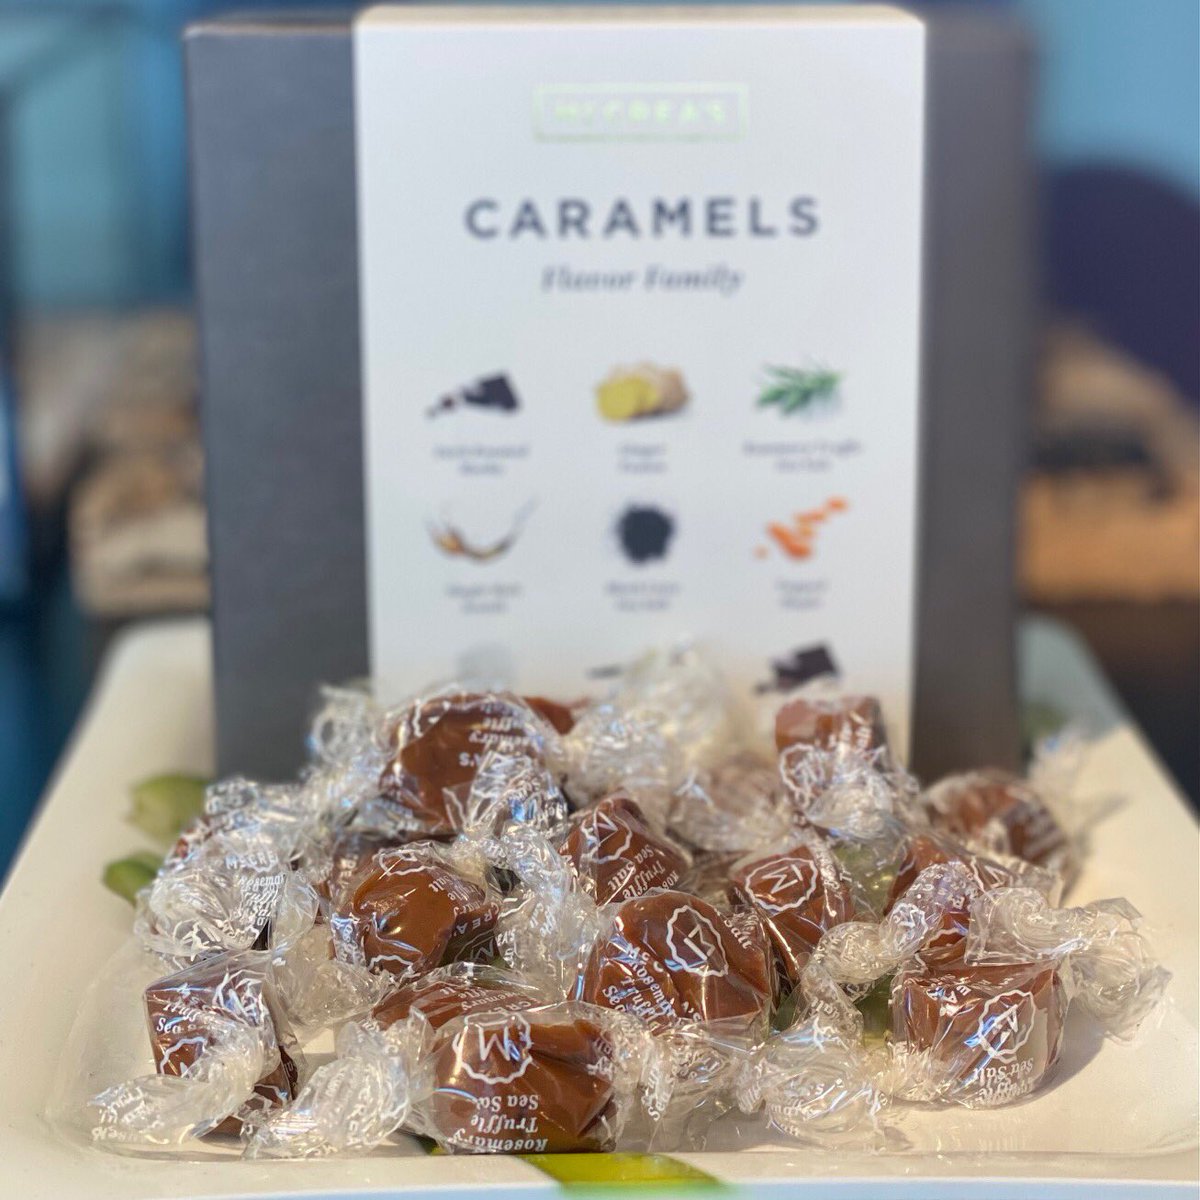 #weekendsweets #weekendtreats #caramels #mccreas #thefittingroomdallas #boutique #boutiqueshopping #boutiquefinds #gifts #sweetgifts #dallasshopping #shopdallas #shoplocal #smallbusinessowner